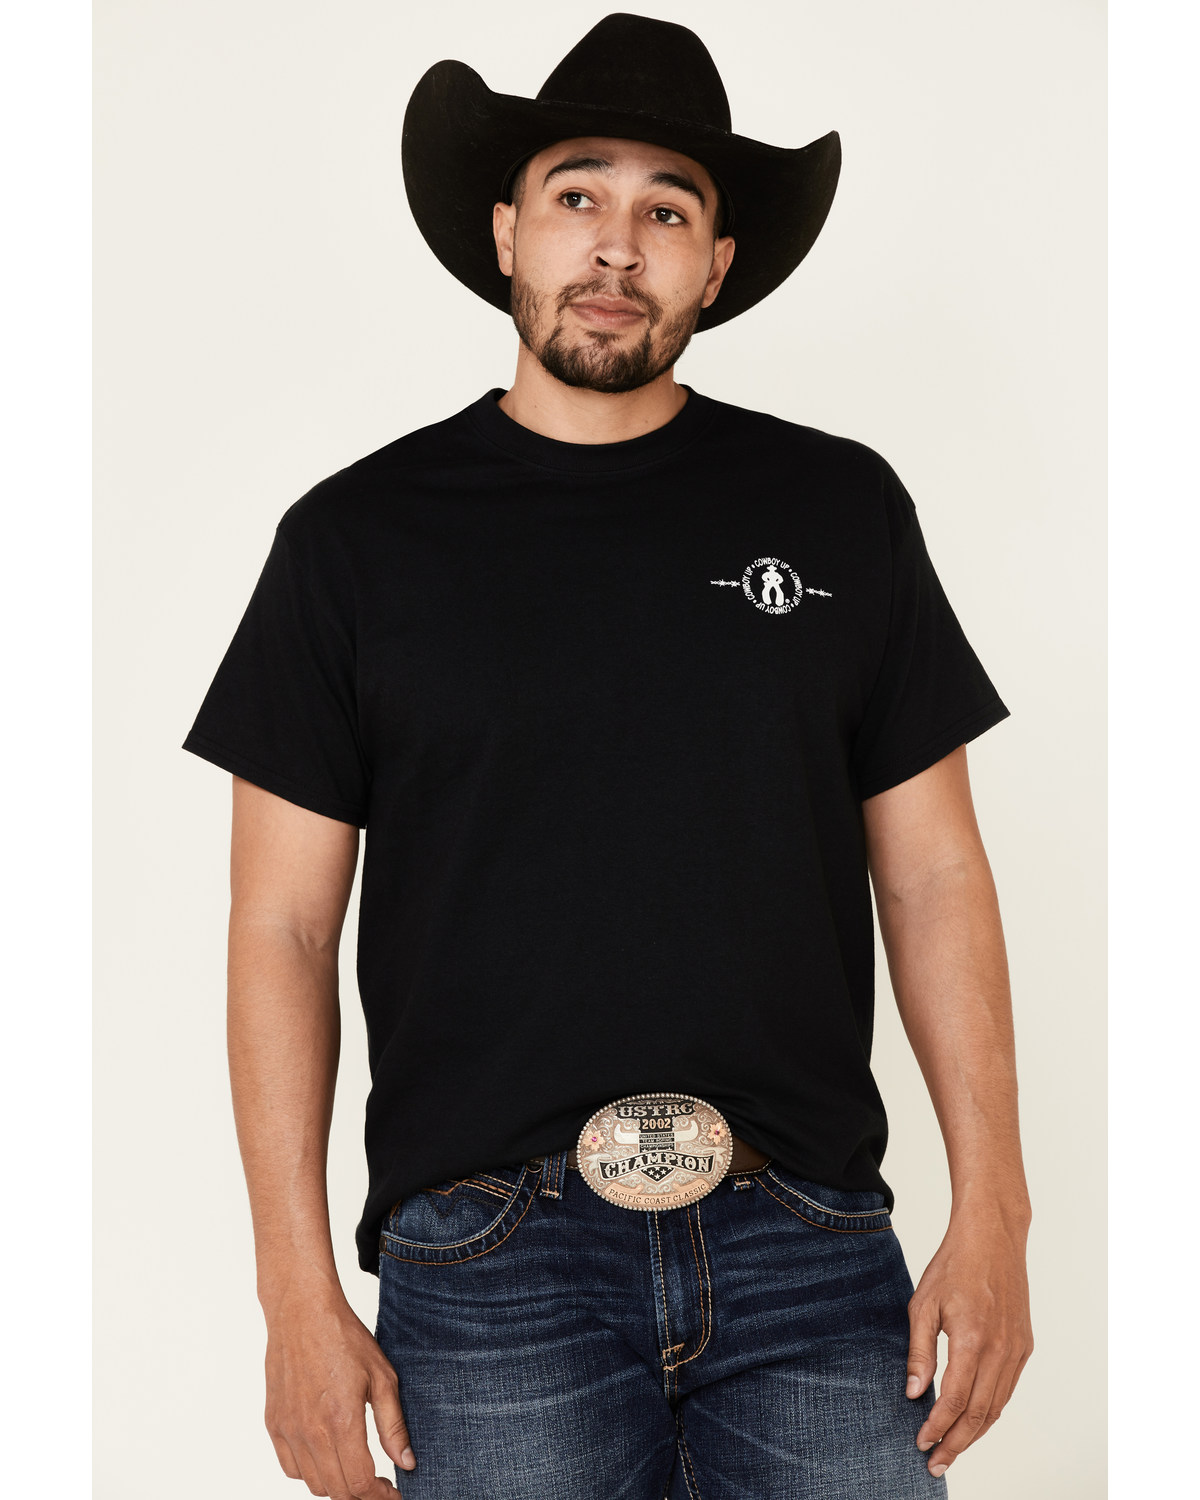 Cowboy Up Men's Two Words America Short Sleeve Graphic T-Shirt